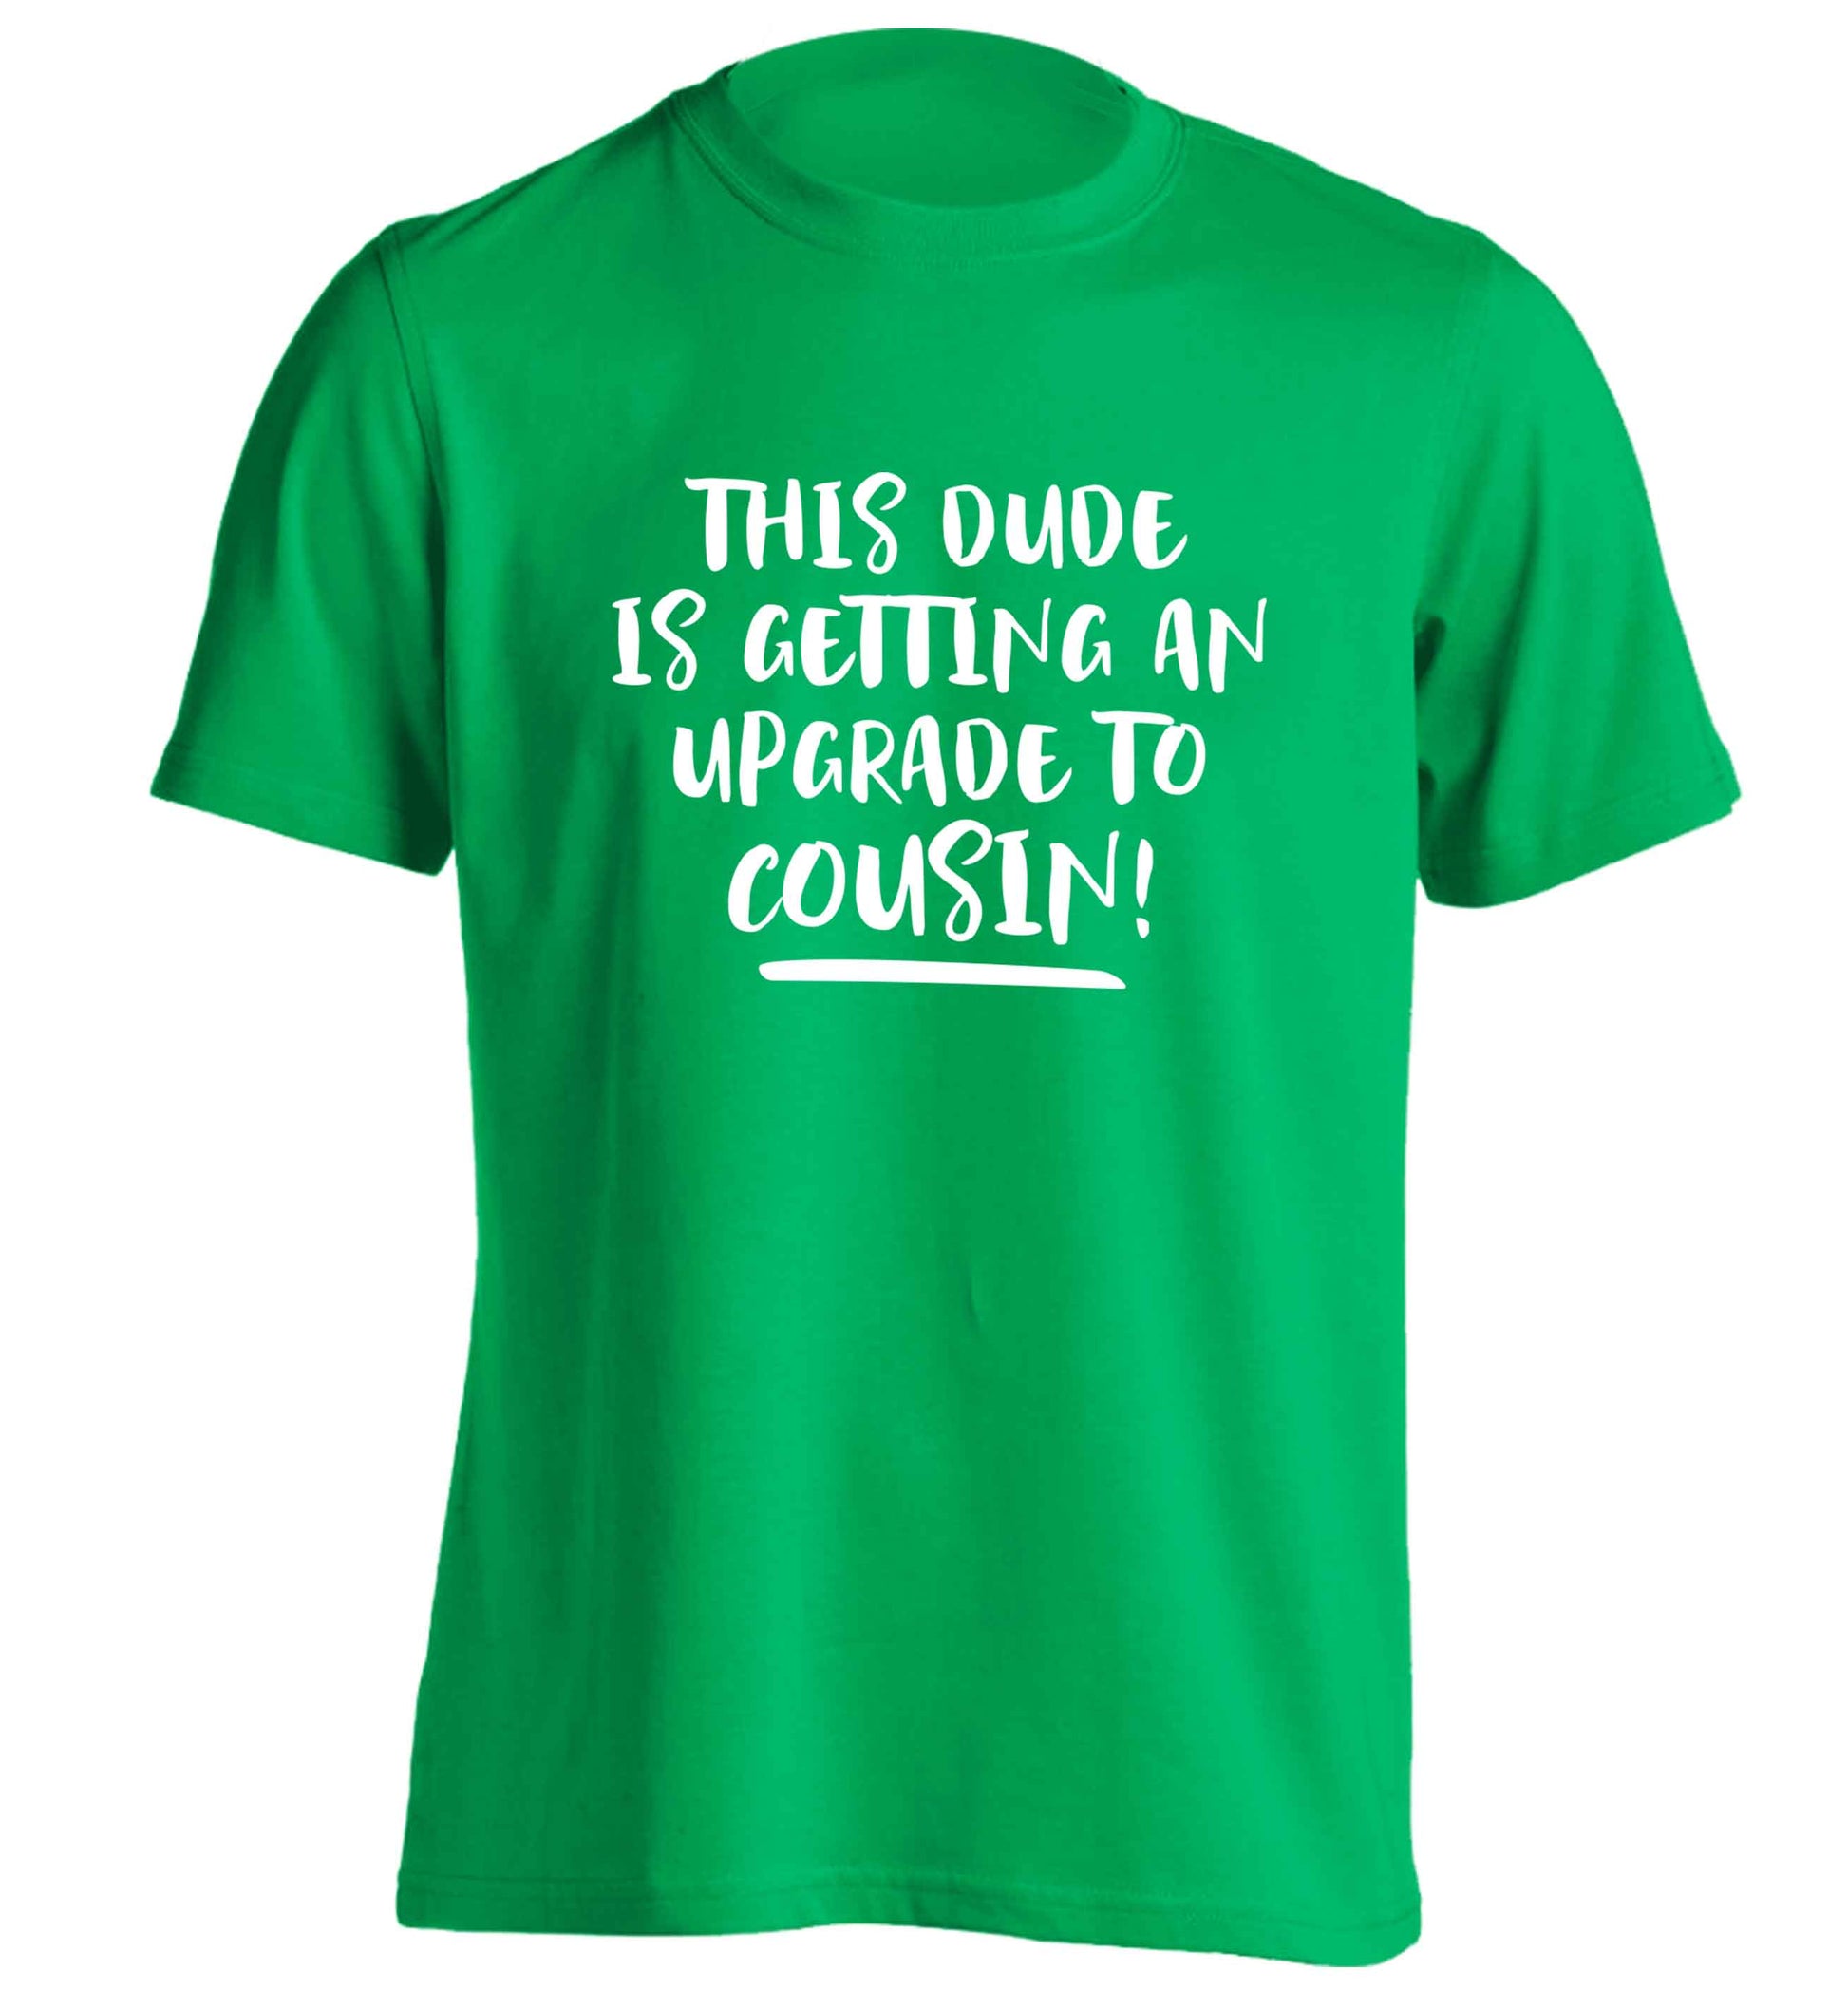 This dude is getting an upgrade to cousin! adults unisex green Tshirt 2XL